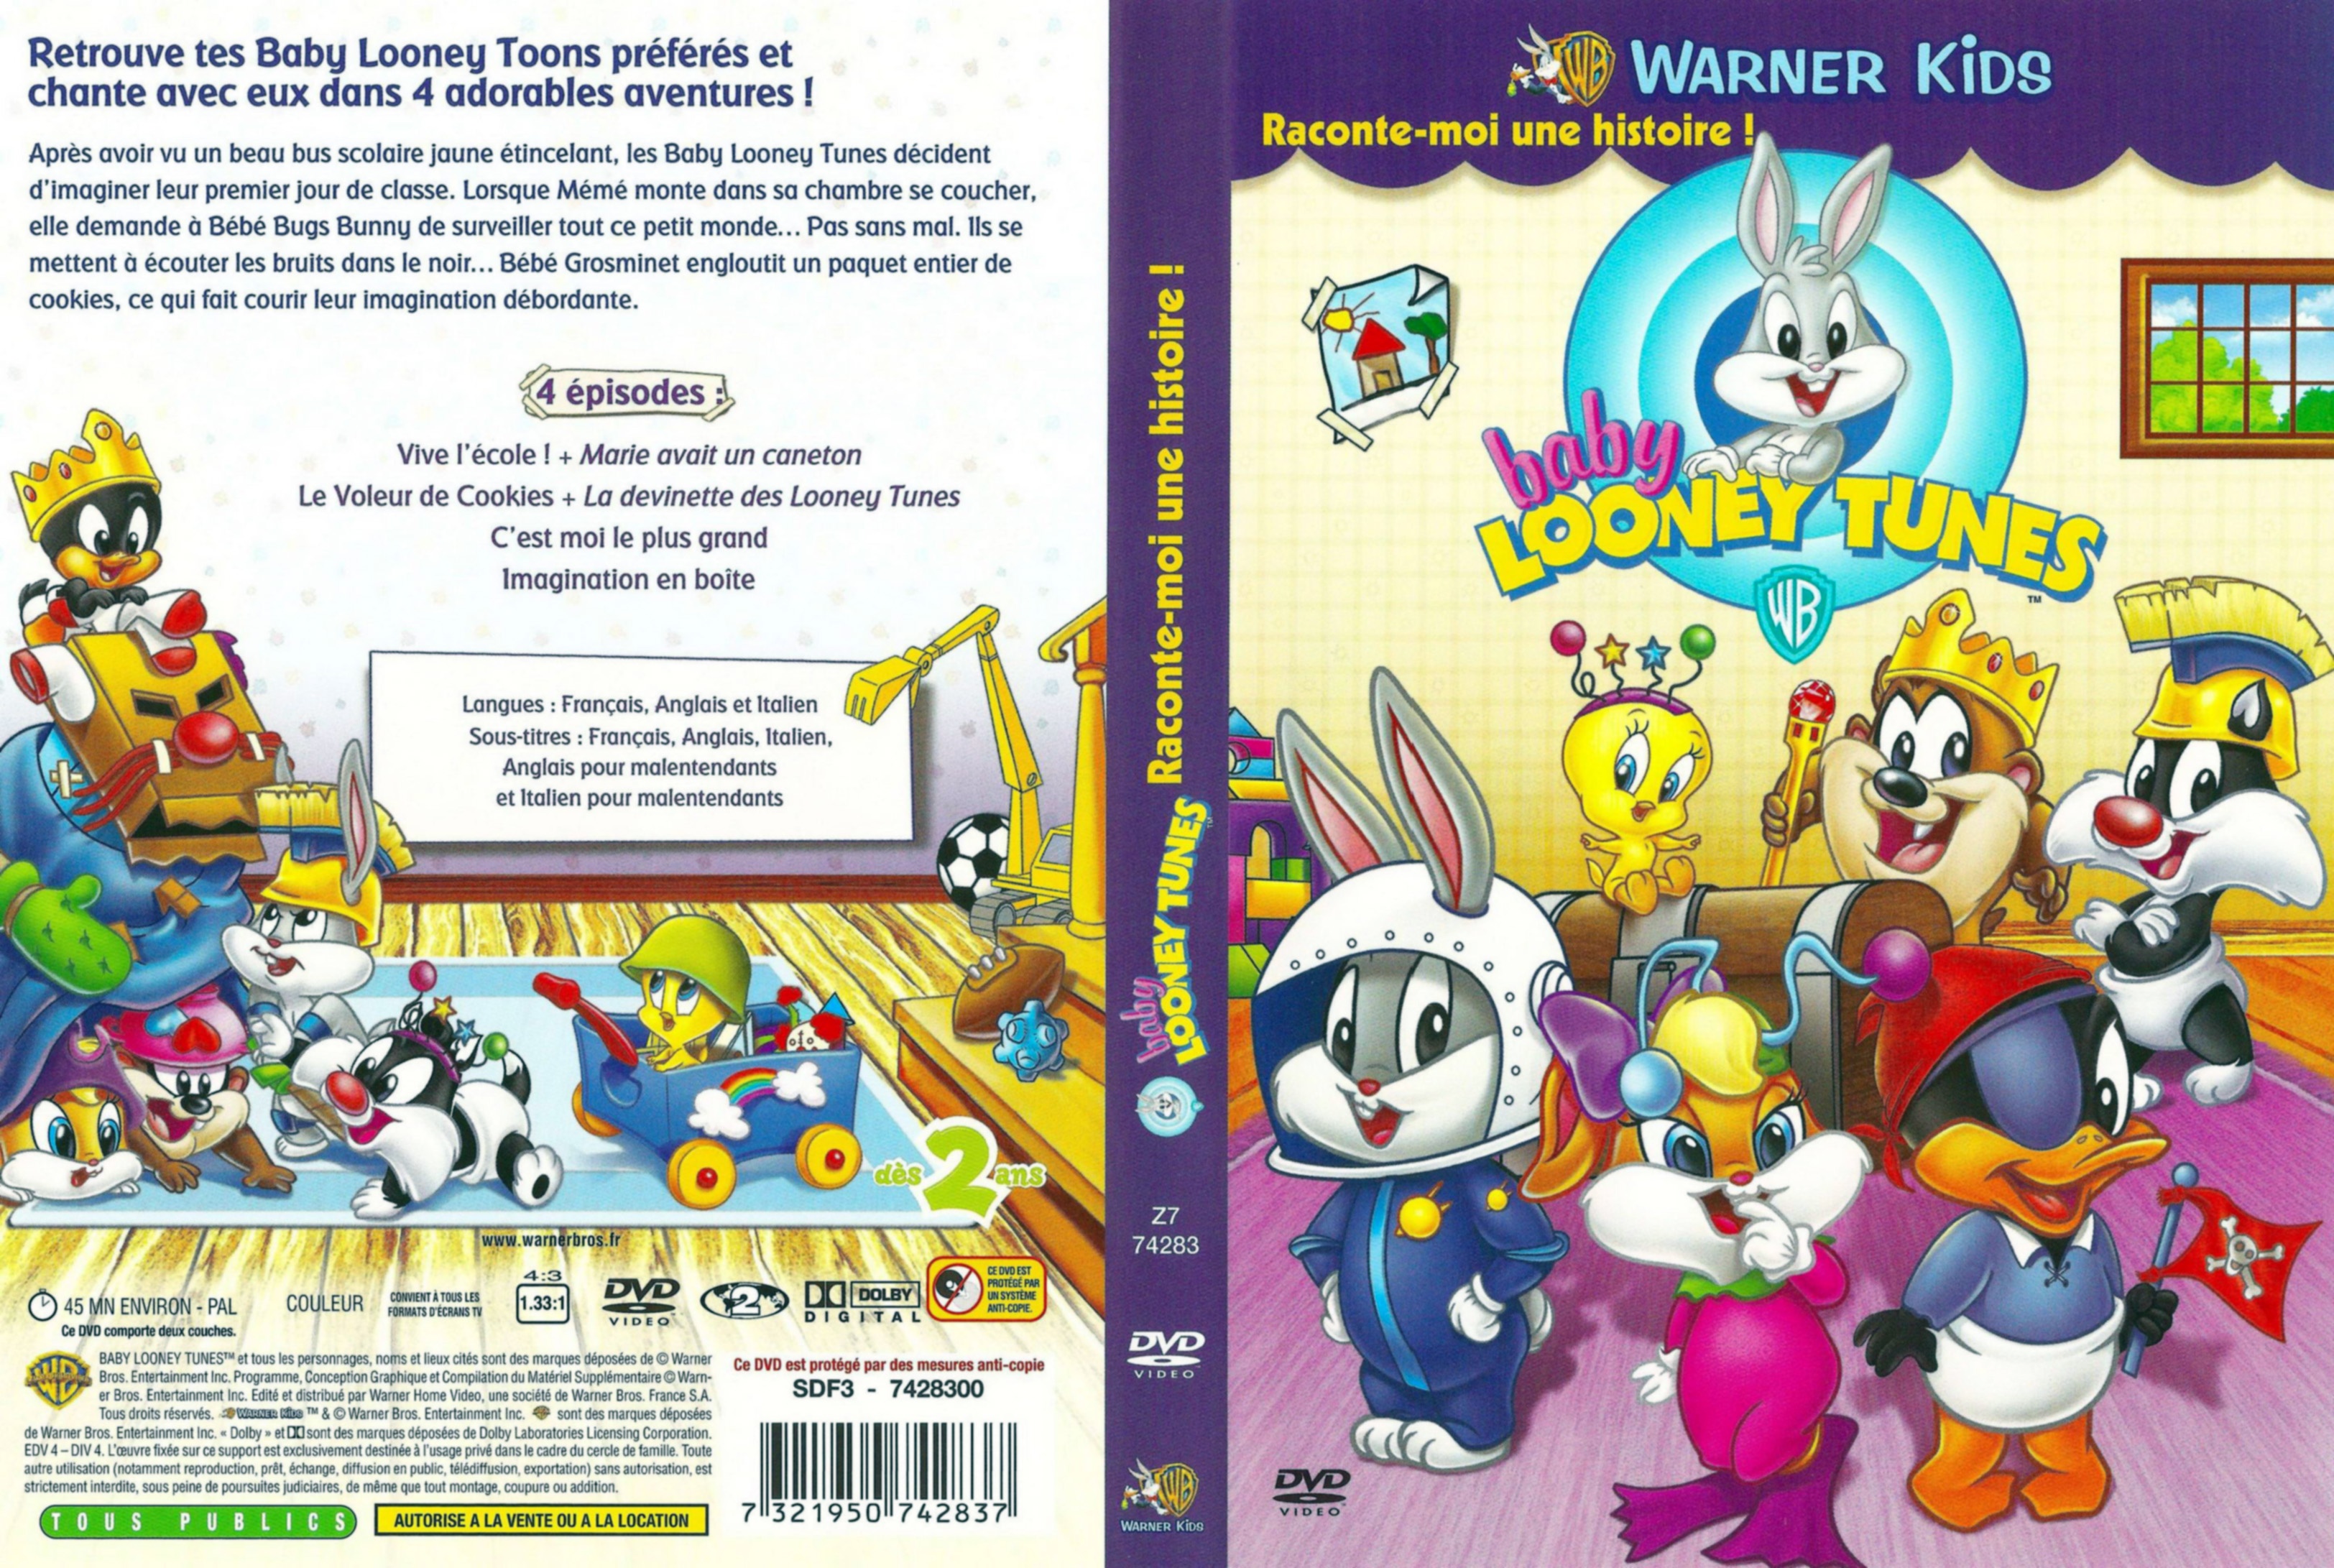 Jaquette DVD Baby looney tunes Racontes-moi une histoire